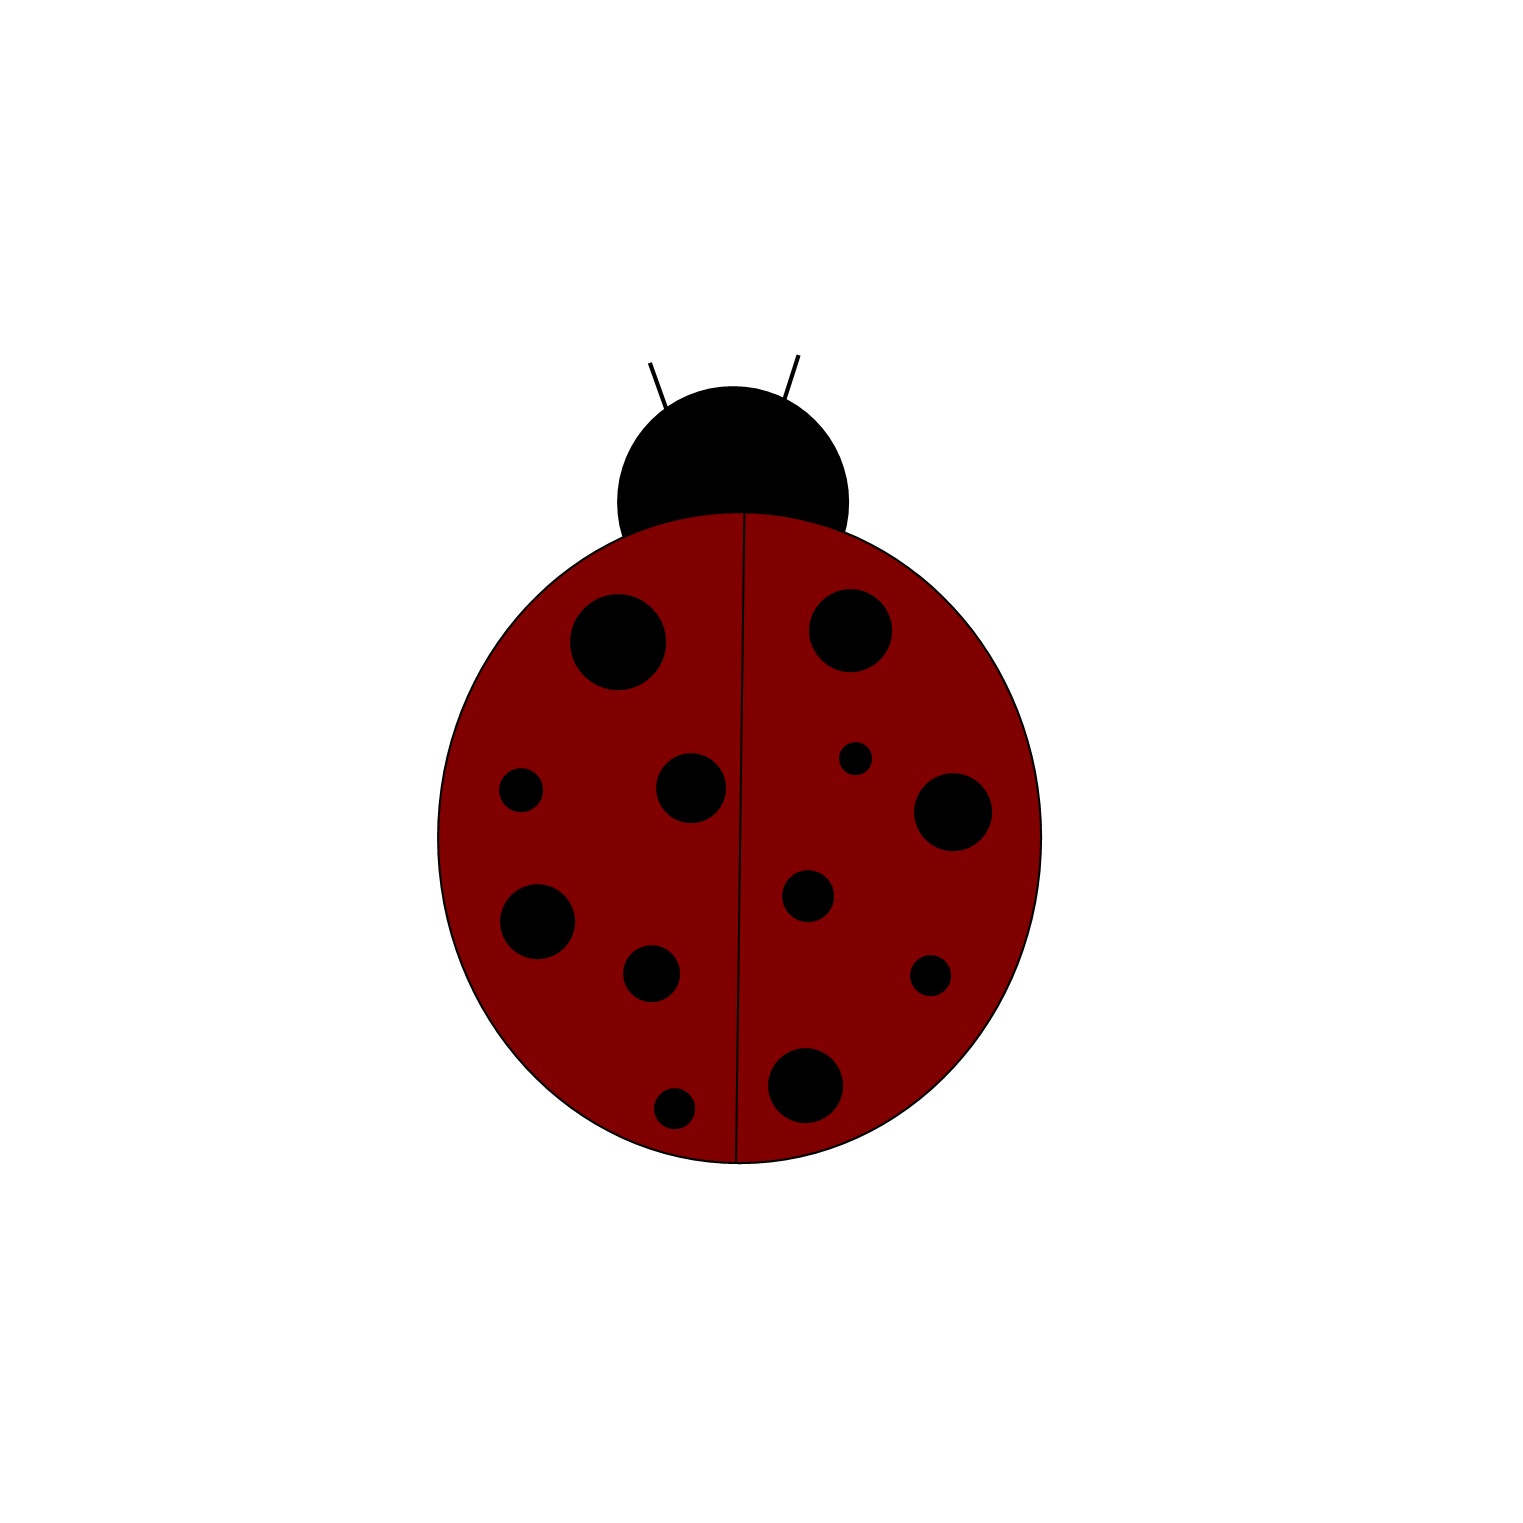 Ladybug isolated on a Transparent Background 24249280 PNG